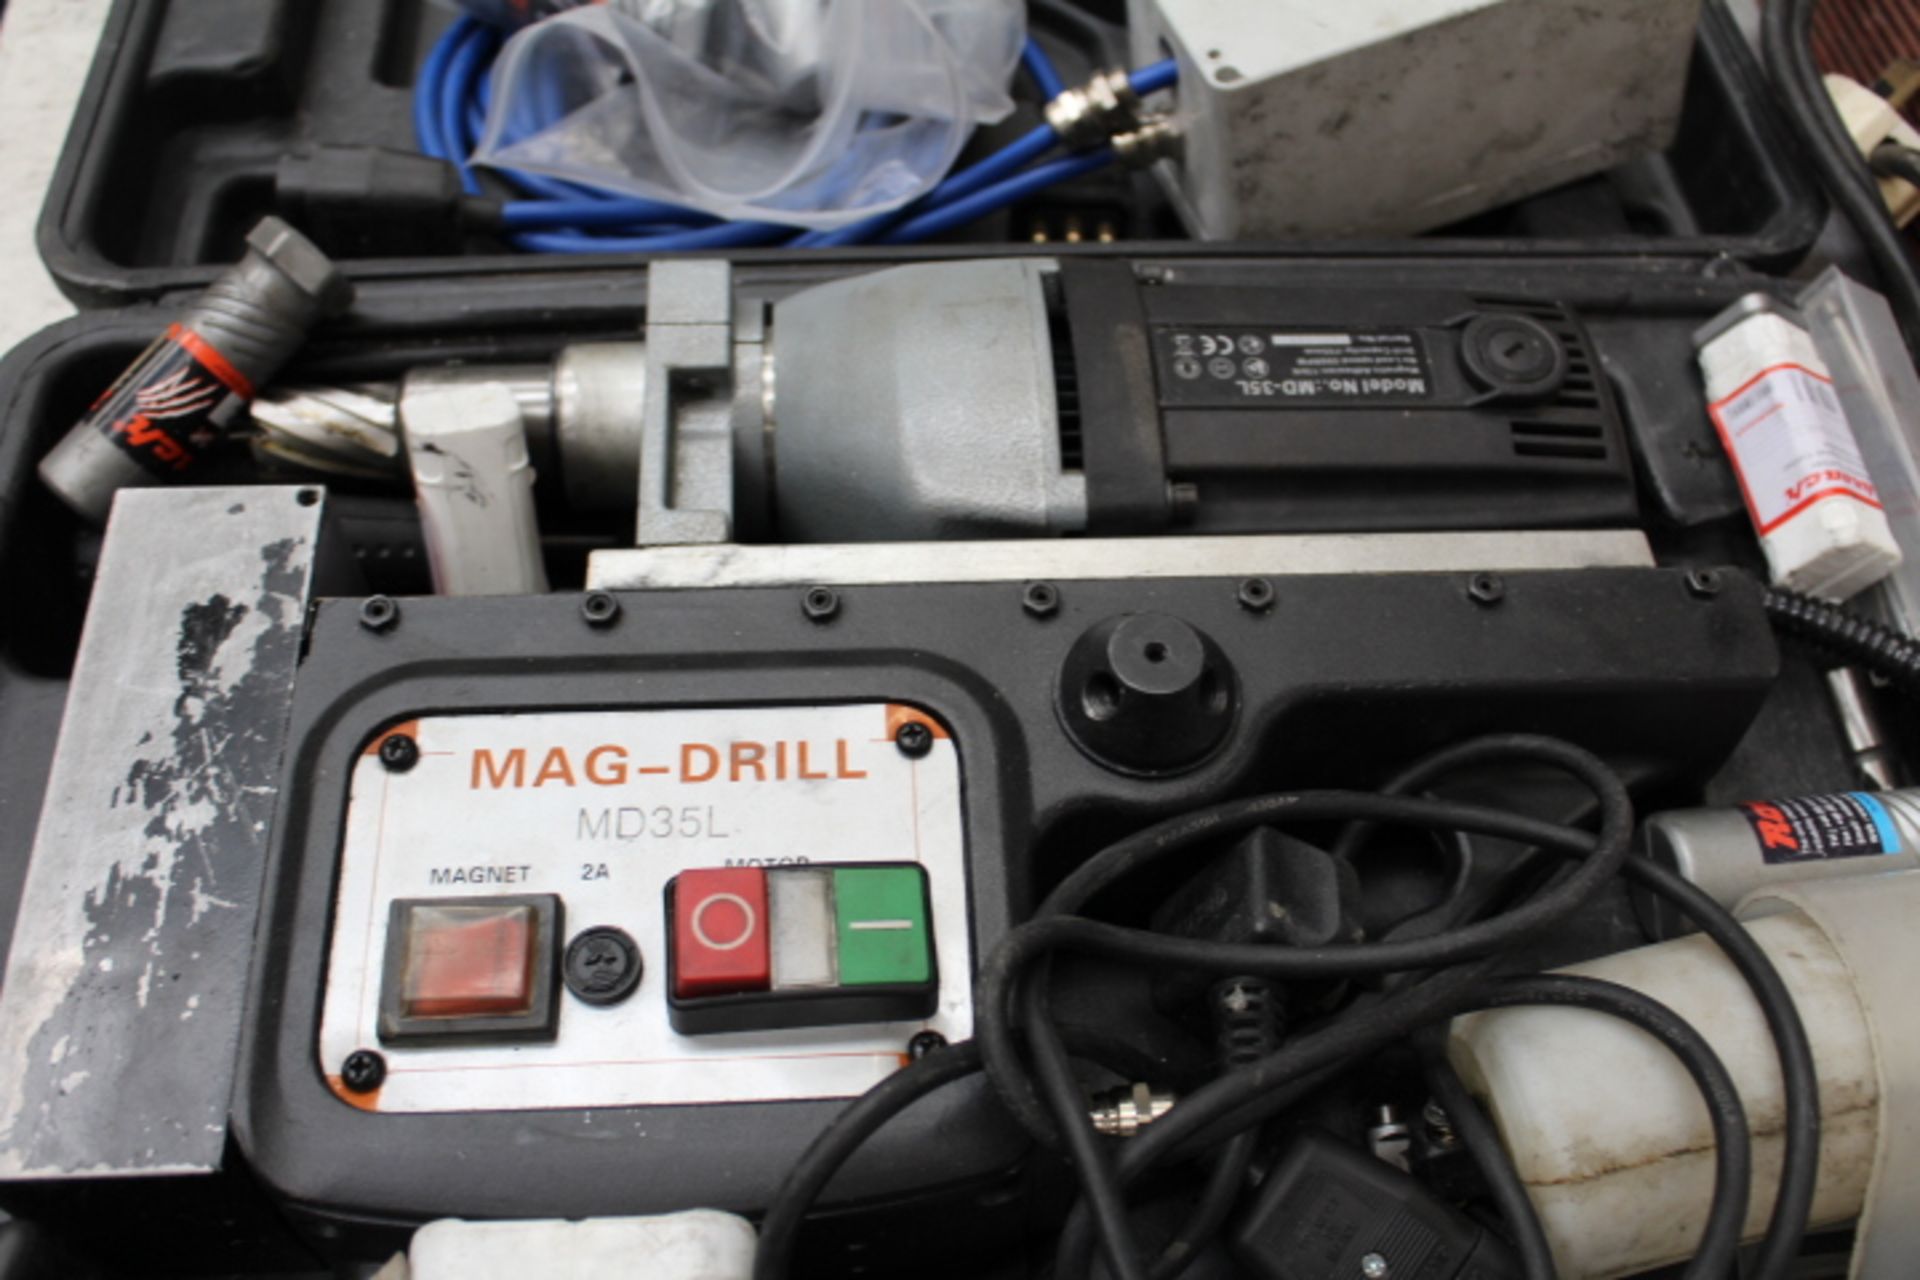 Magdrill MD35L MAGNETIC BASE DRILL, 240V - Image 2 of 3